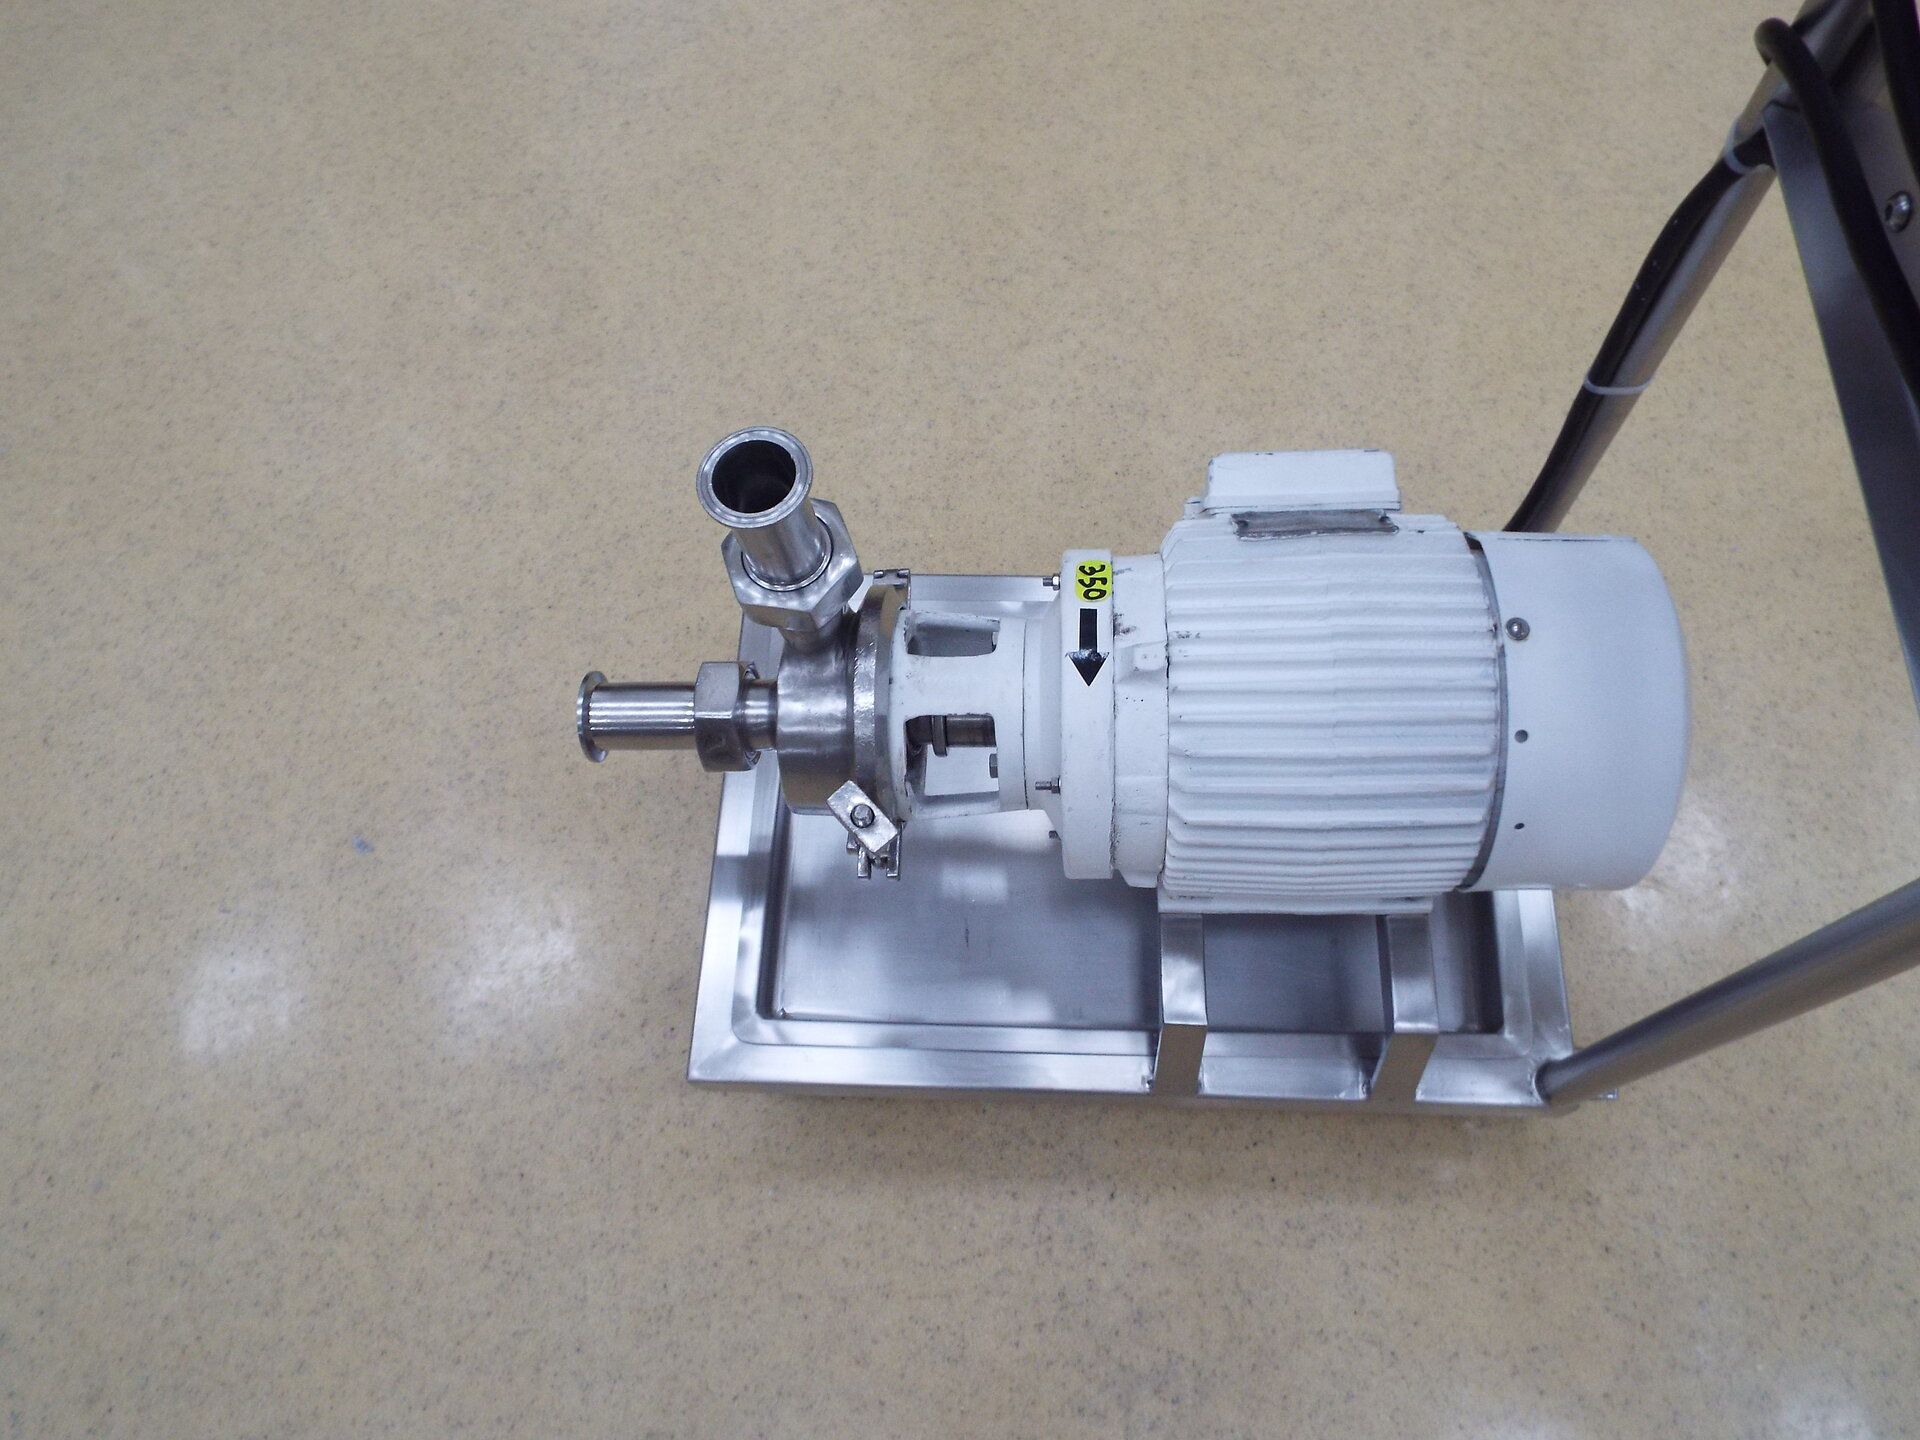 Remsa stainless steeel 1HP centrifugal pump 4" impeler on stainless steel platform on casters - Image 2 of 3